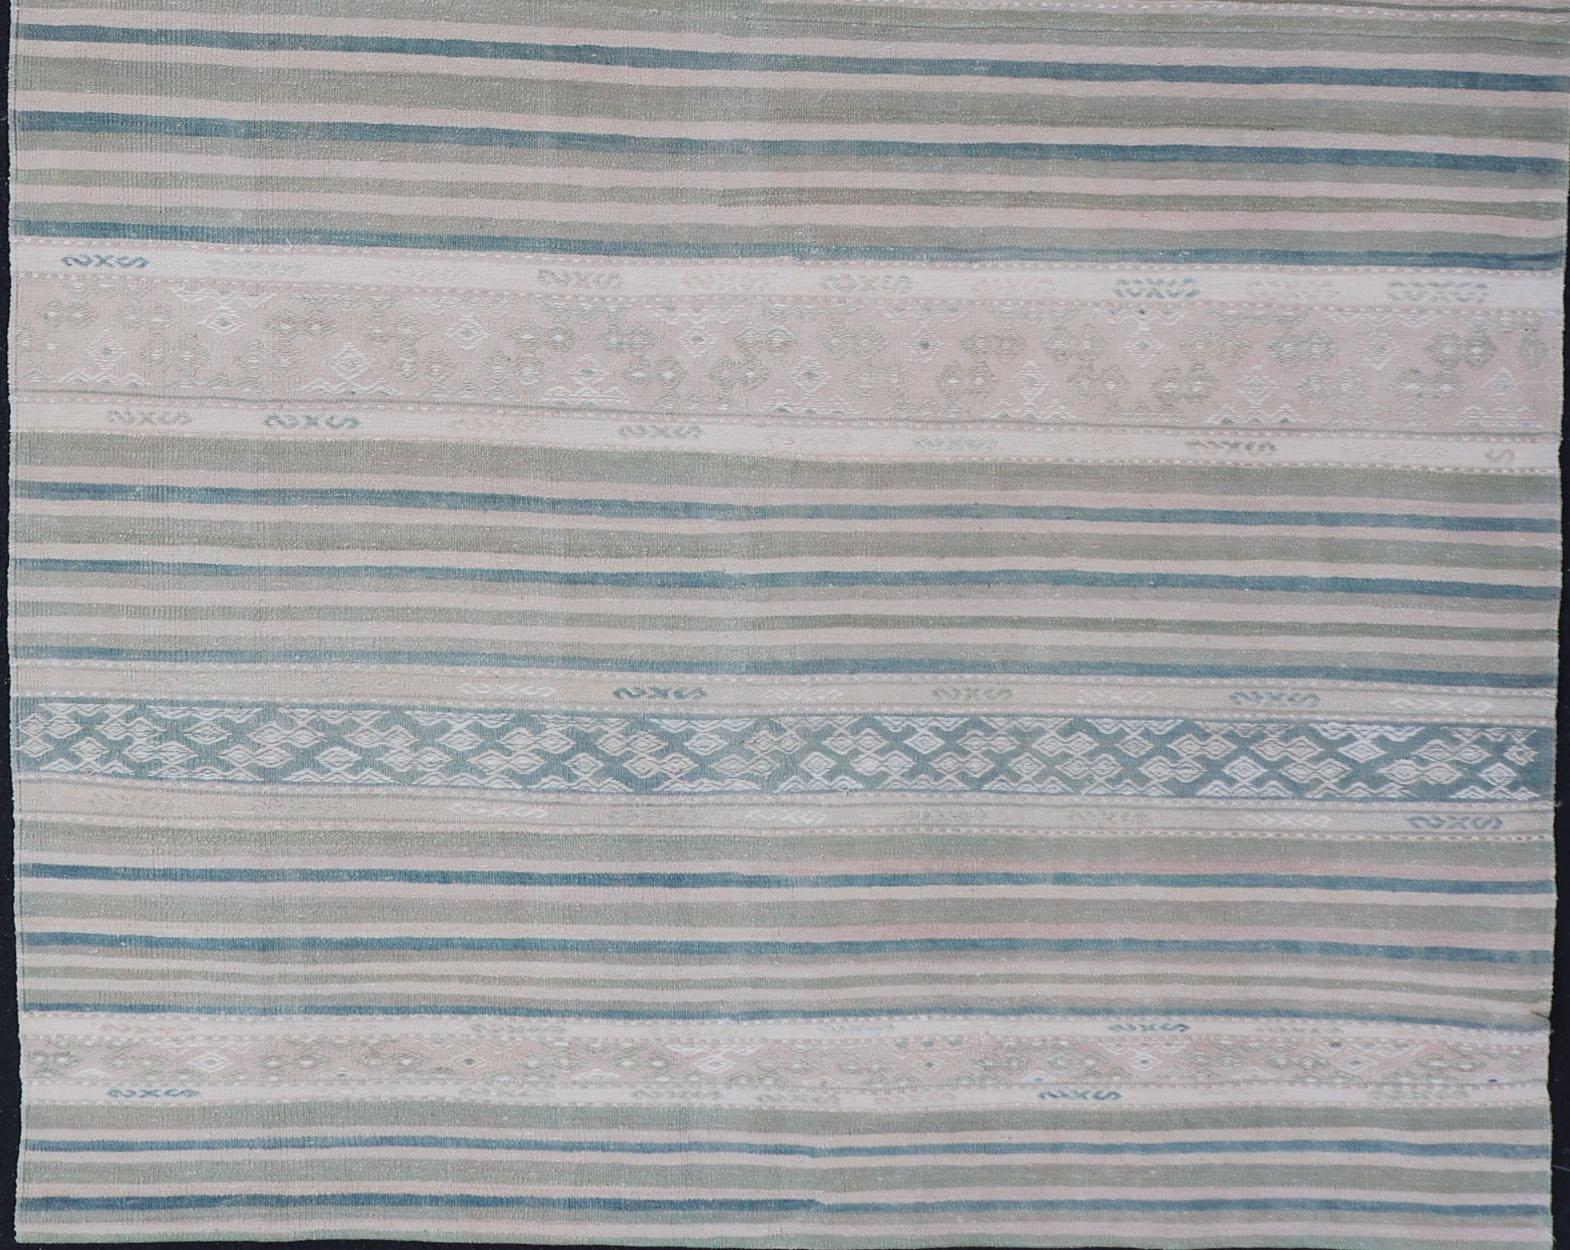 Hand-Woven Vintage Flat-Weave Kilim with Embroideries in Blush, Green, Blue and Gray For Sale